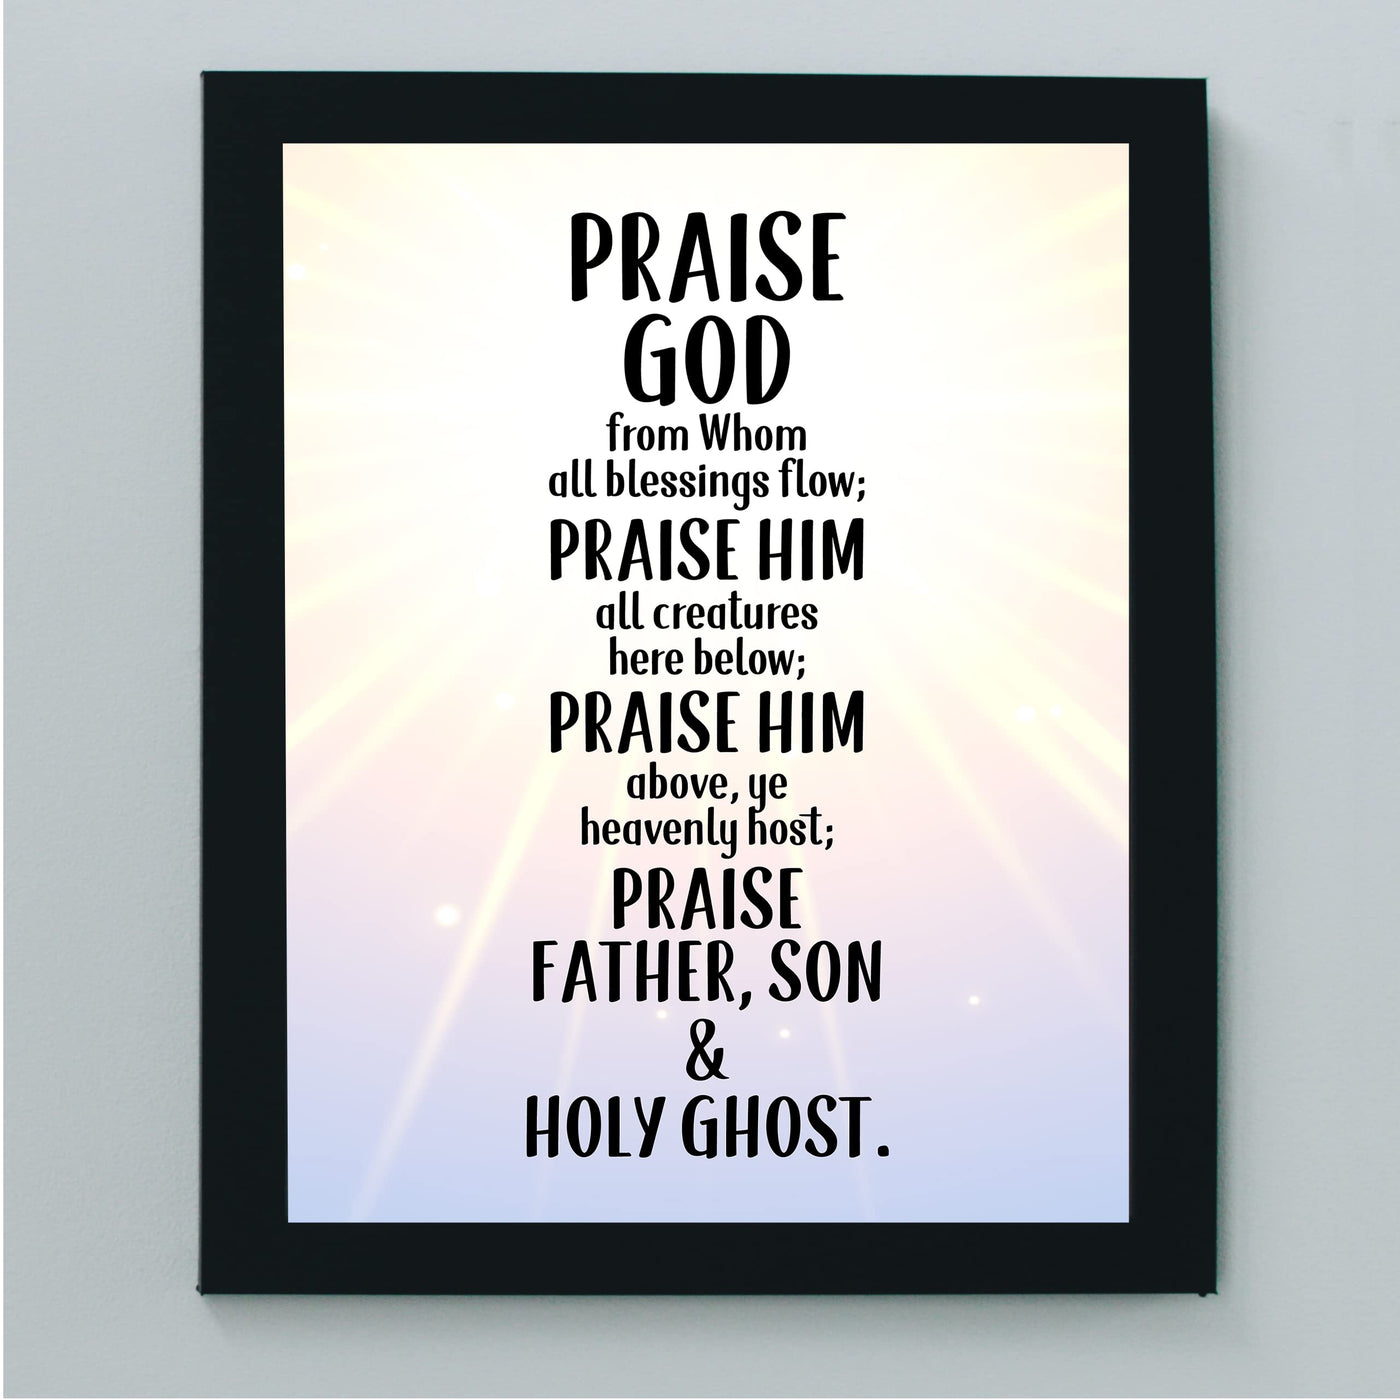 Praise God From Whom All Blessings Flow Christian Hymn Music Wall Art -8 x10" Inspirational Scripture Song Print -Ready to Frame. Classic Hymnal Decoration for Home-Office-Church & Religious Decor!